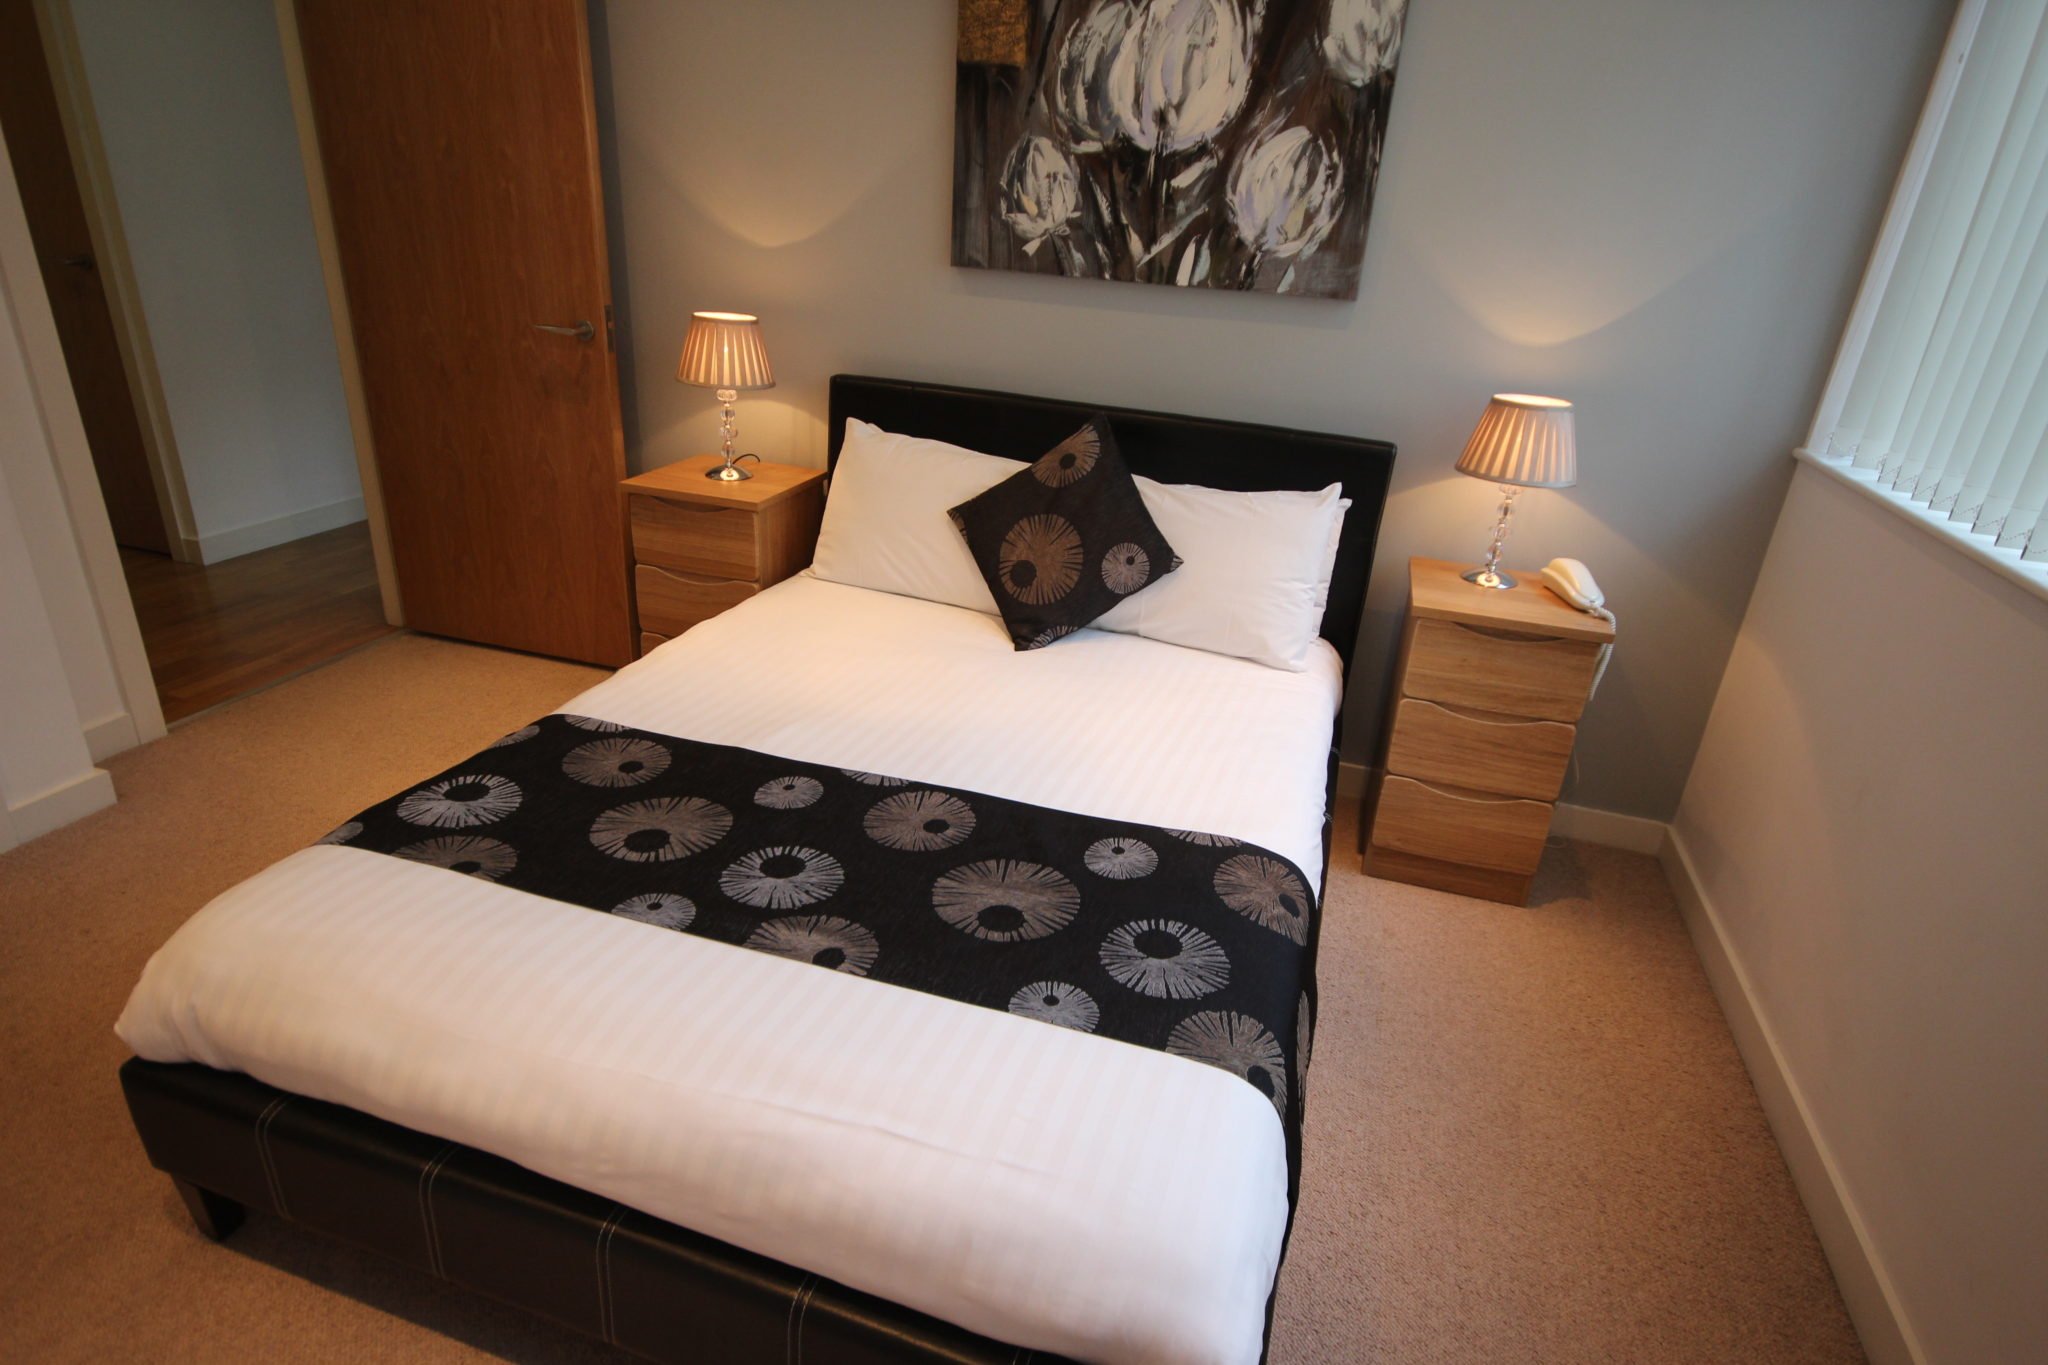 Luxury-Apartments-Newcastle-UK-available-Now-for-Short-Lets!-Book-Fully-Furnished-&-Serviced-Apartments-in-Central-Newcastle-for-cheaper-than-a-Hotel!-Urban-Stay